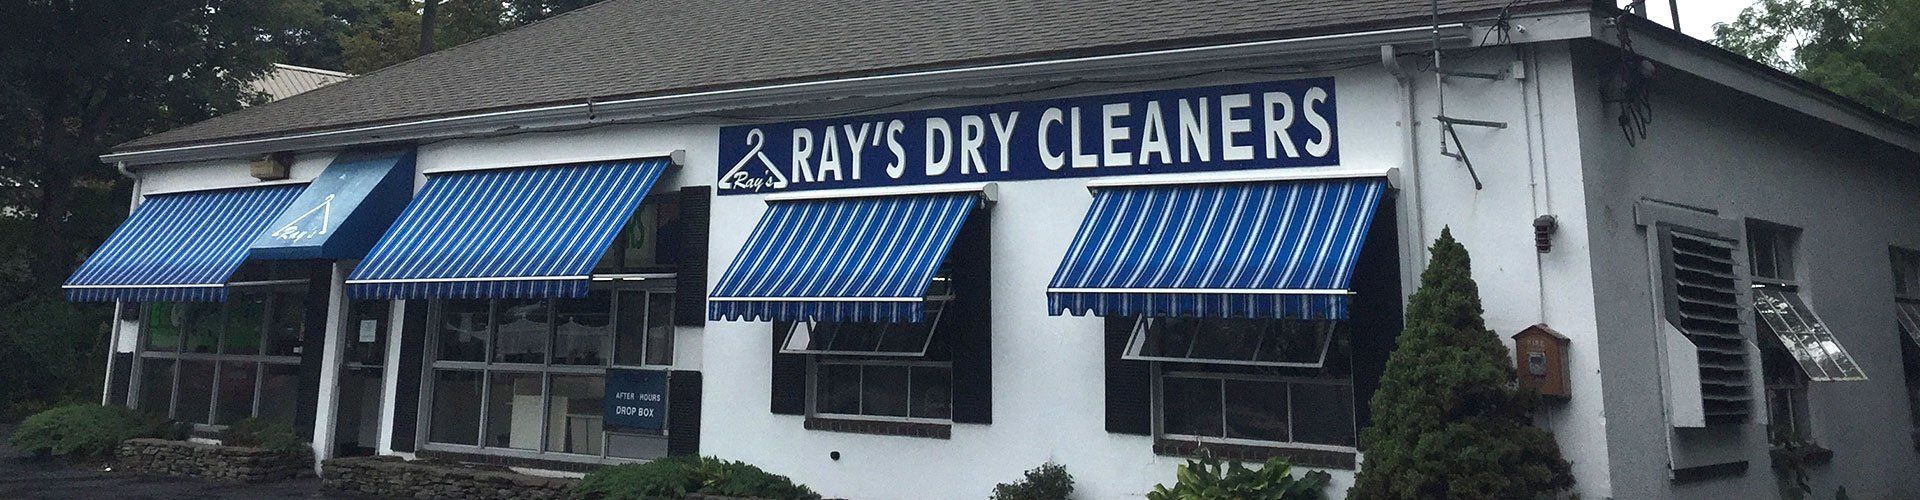 Ray's Dry Cleaners Store